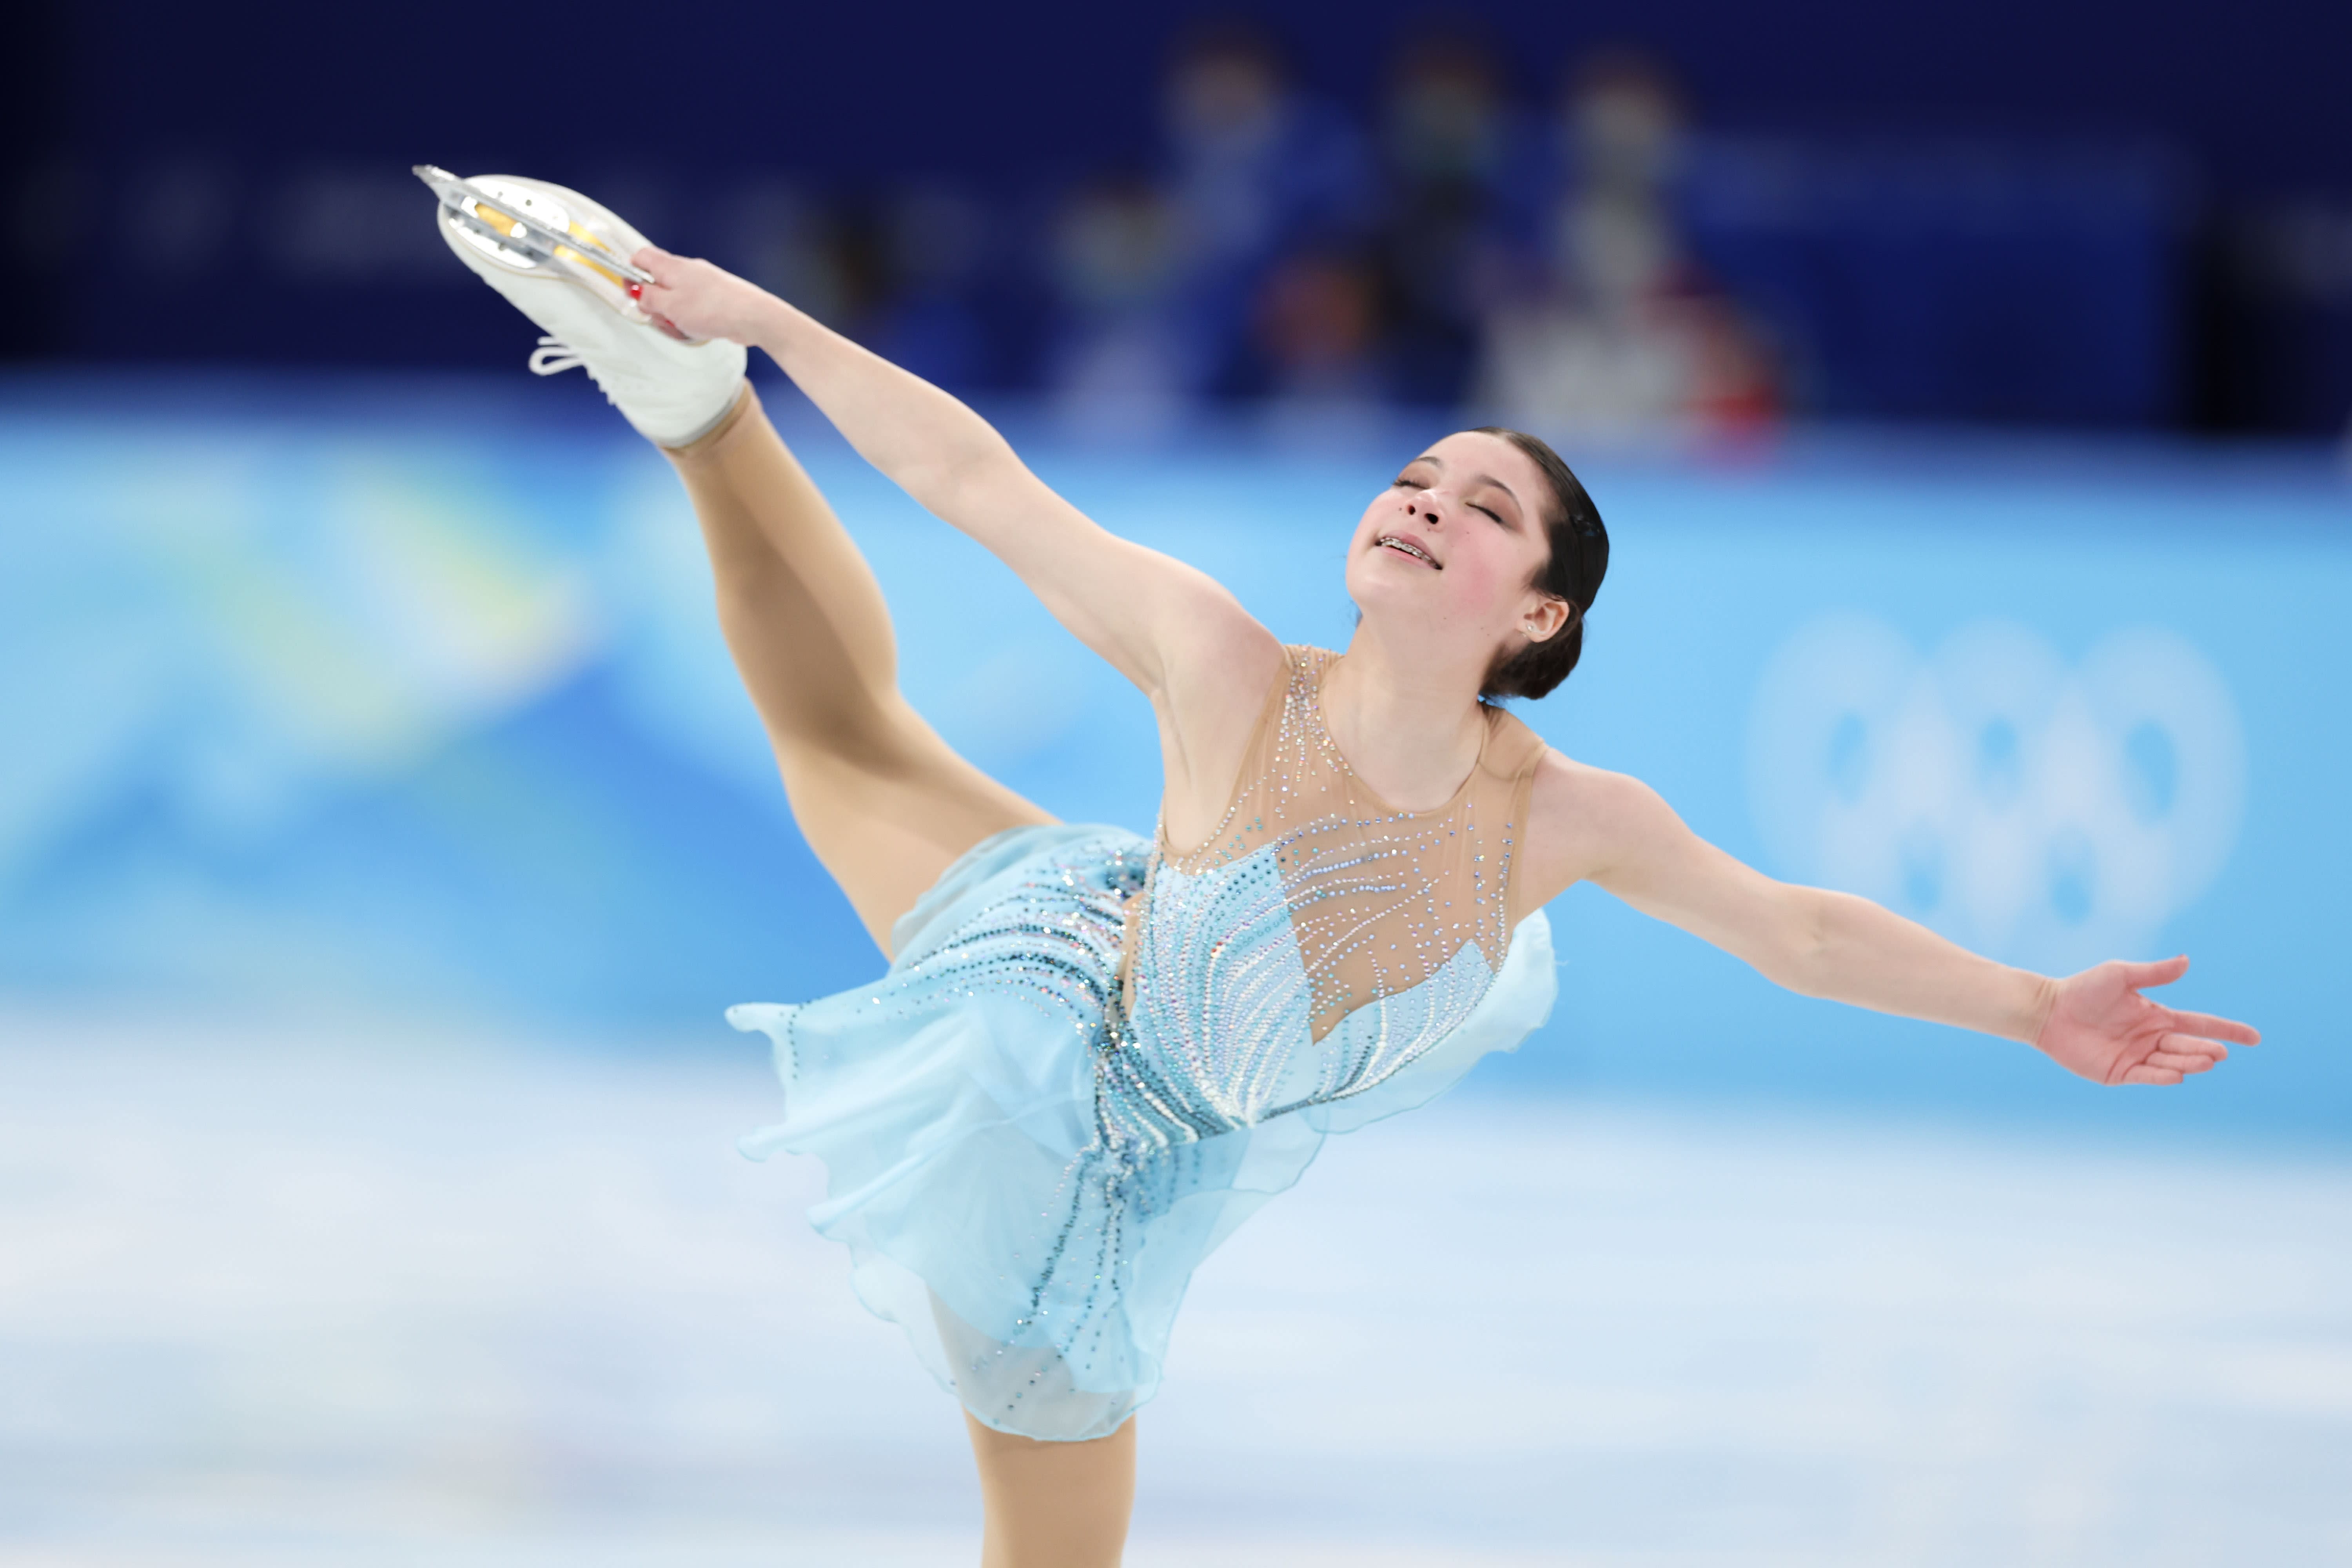 China targeted dad of Olympic figure skater Alysa Liu, other critics in U.S., DOJ will charge